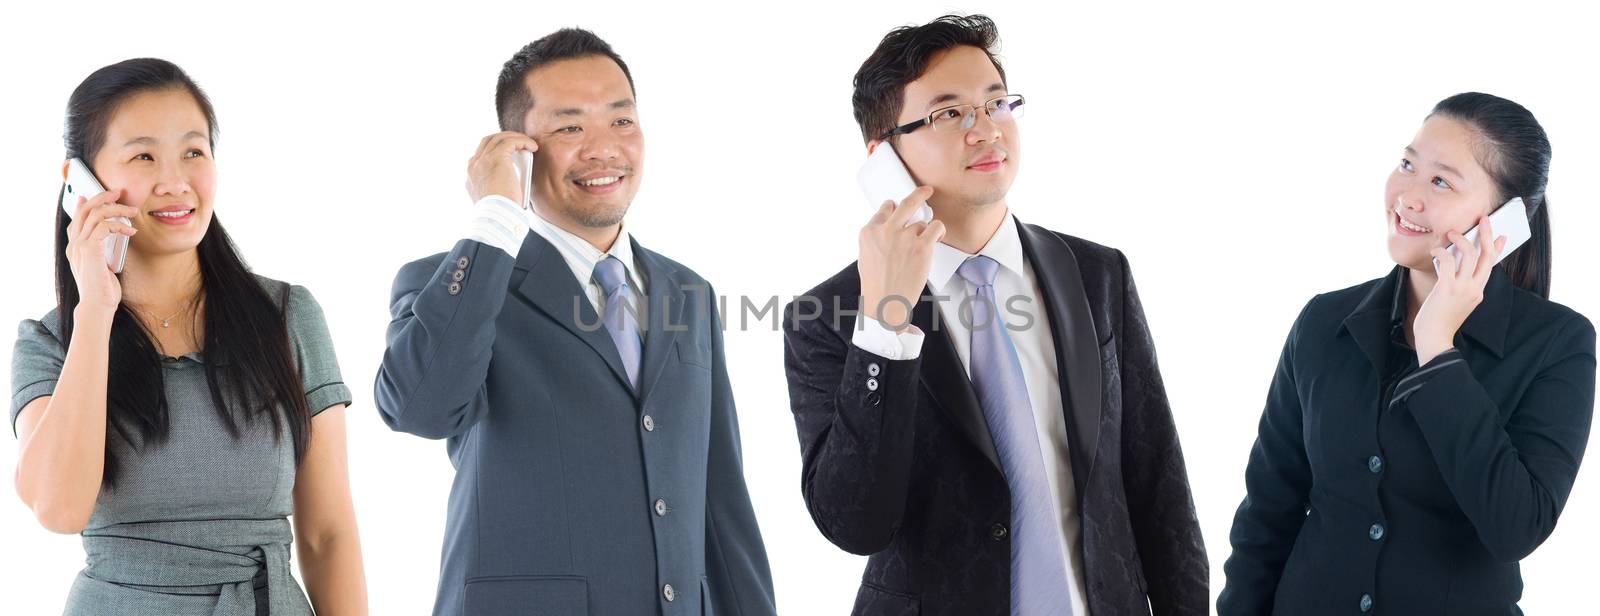 Portraits of diverse asian people and mixed age group of business professionals making call with smartphone.Concept of financial, technology and marketing business. 